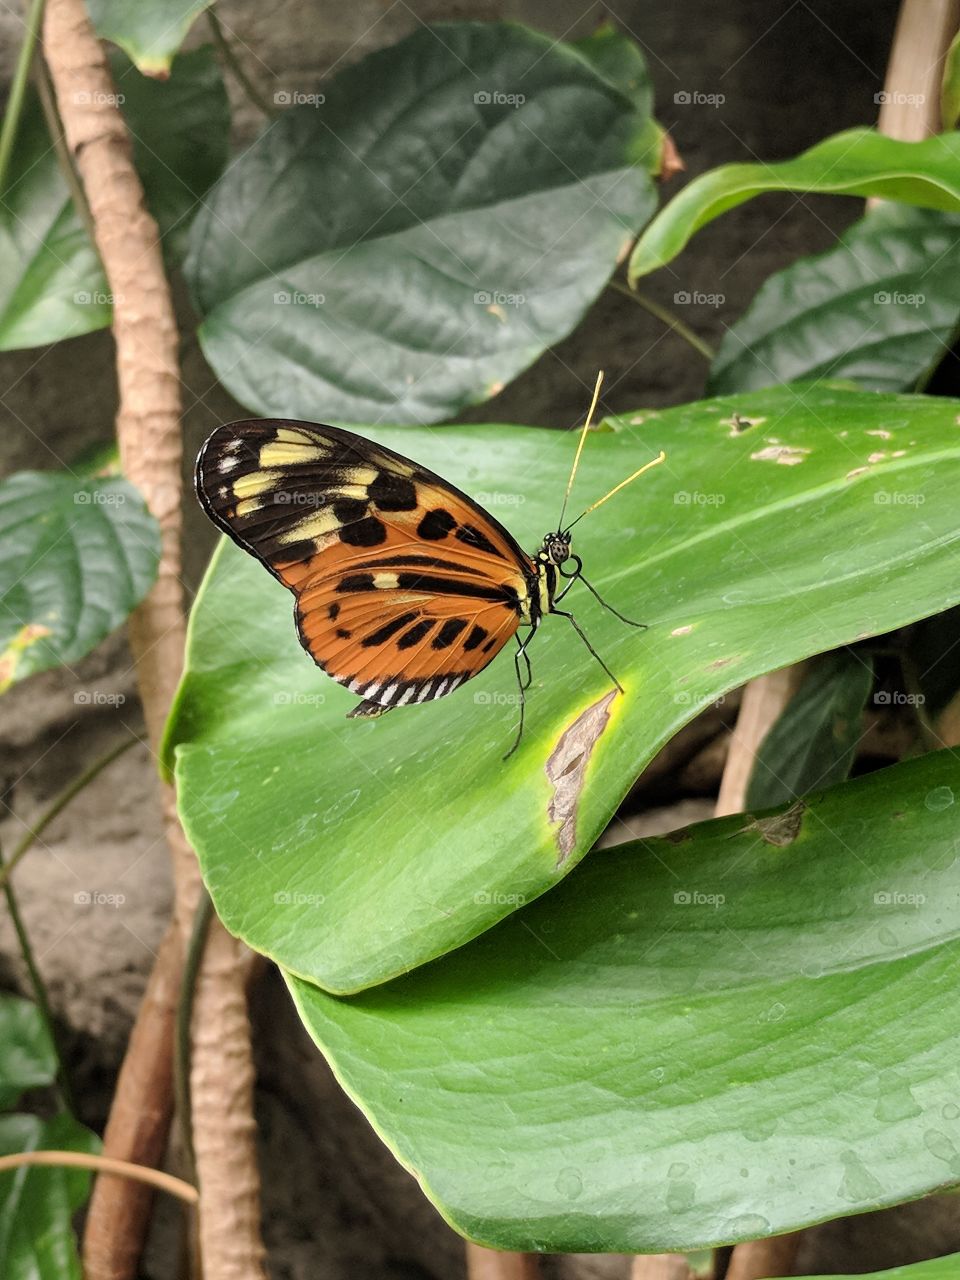 Butterfly at St. Louis Zoo.